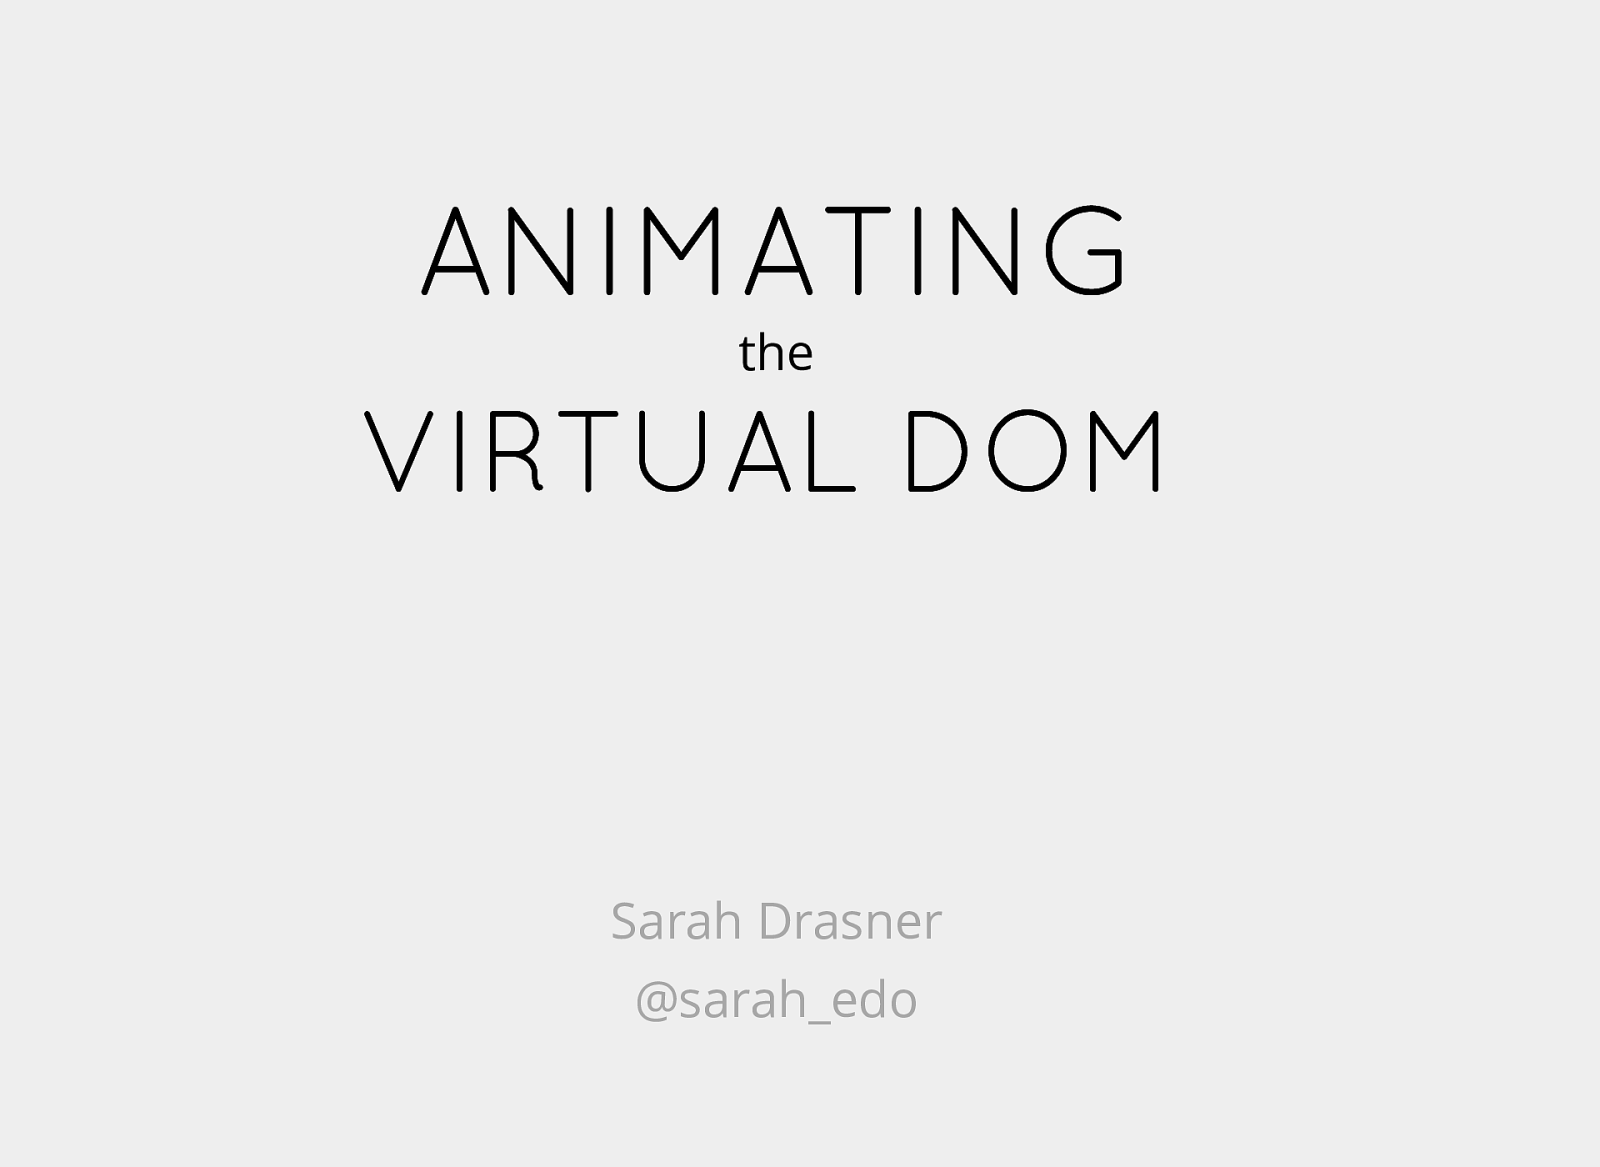 Animating the Virtual DOM